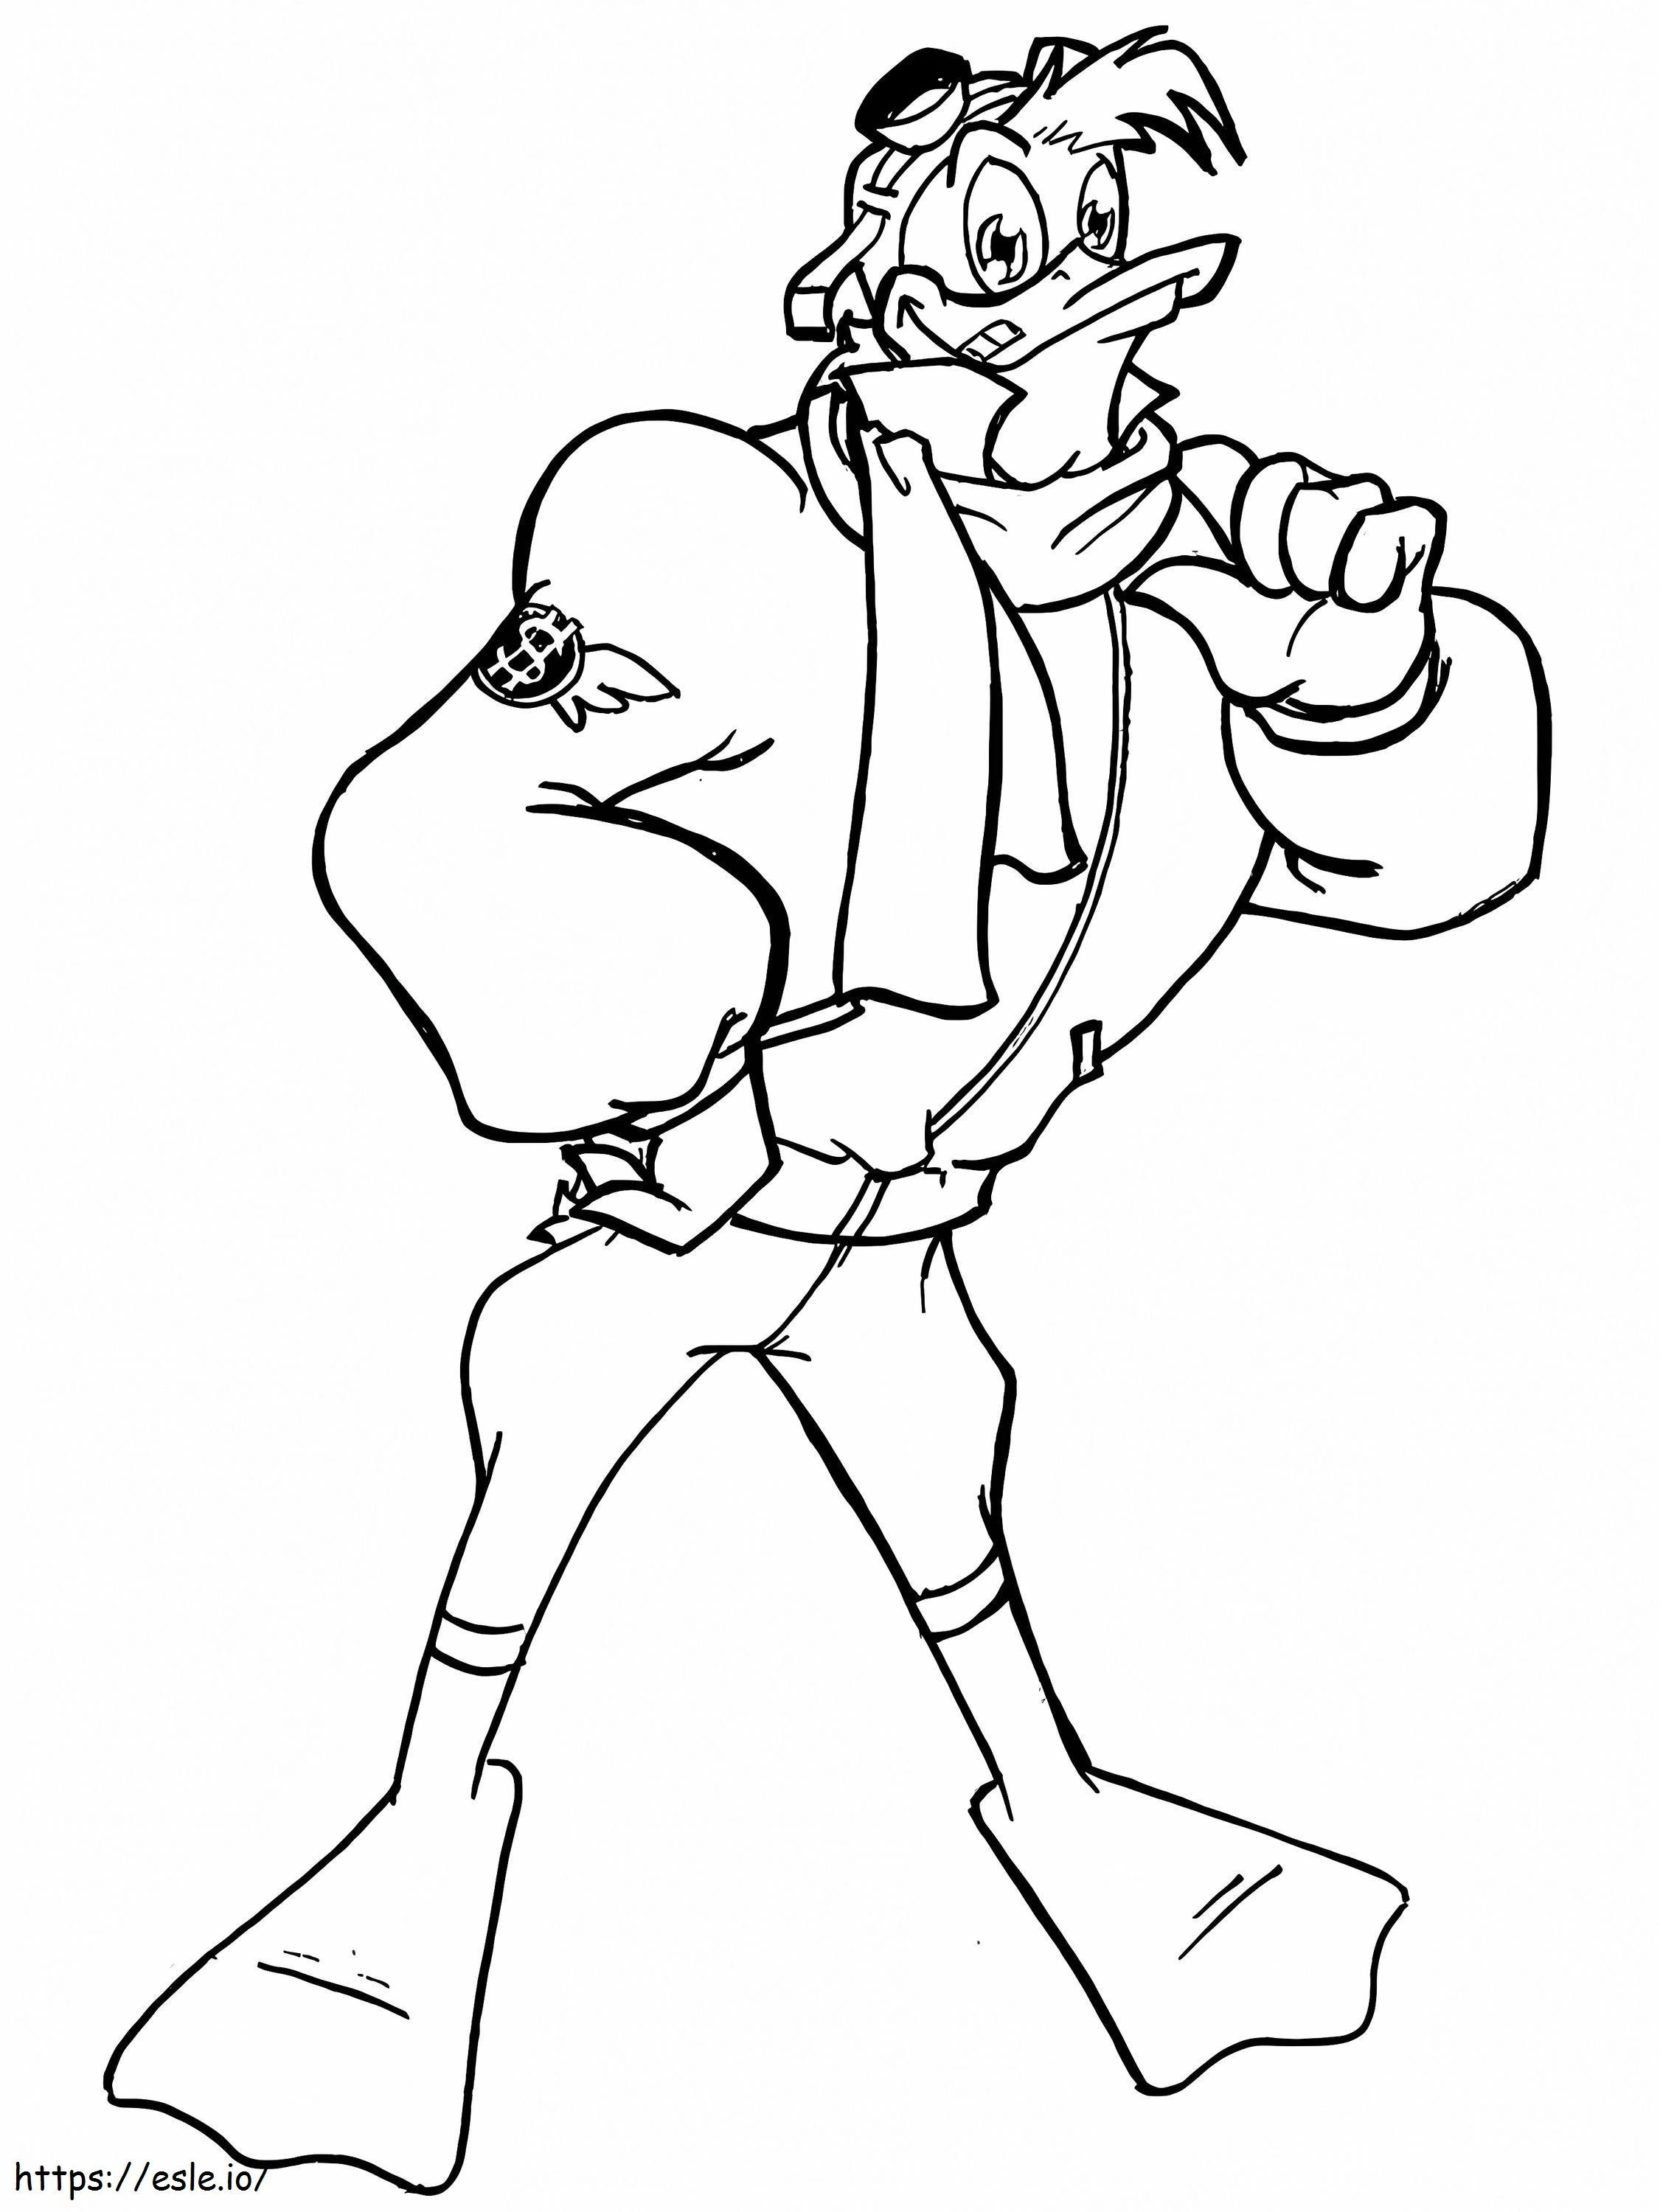 Launchpad McQuack From Ducktales coloring page